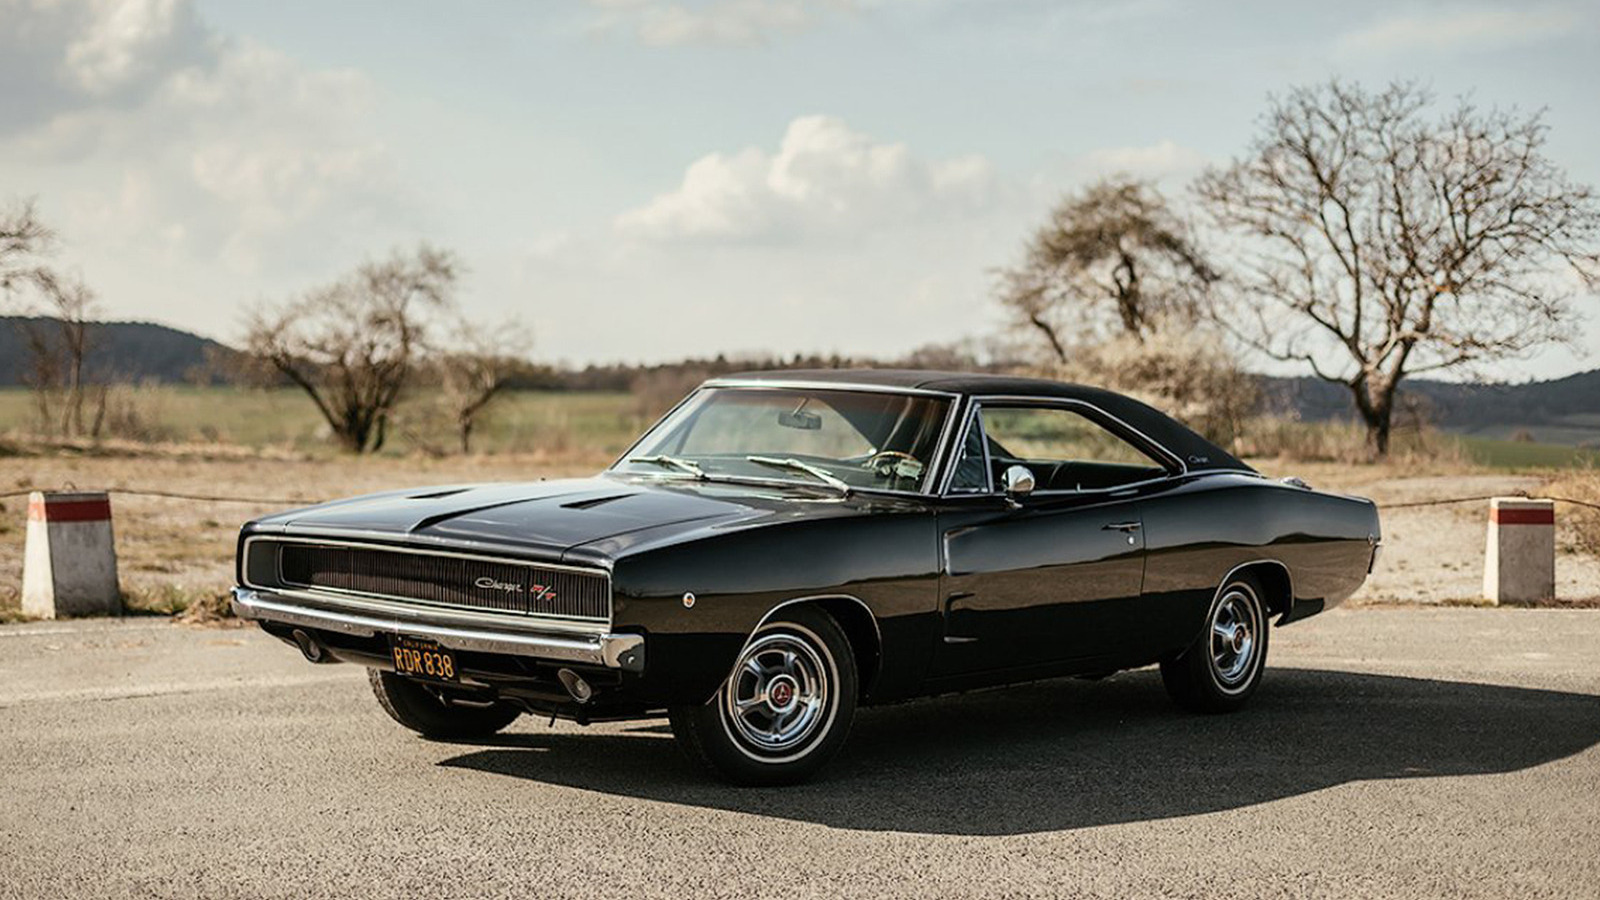 Here’s What Happened To The 1968 Dodge Charger From ‘Bullitt’ – SlashGear